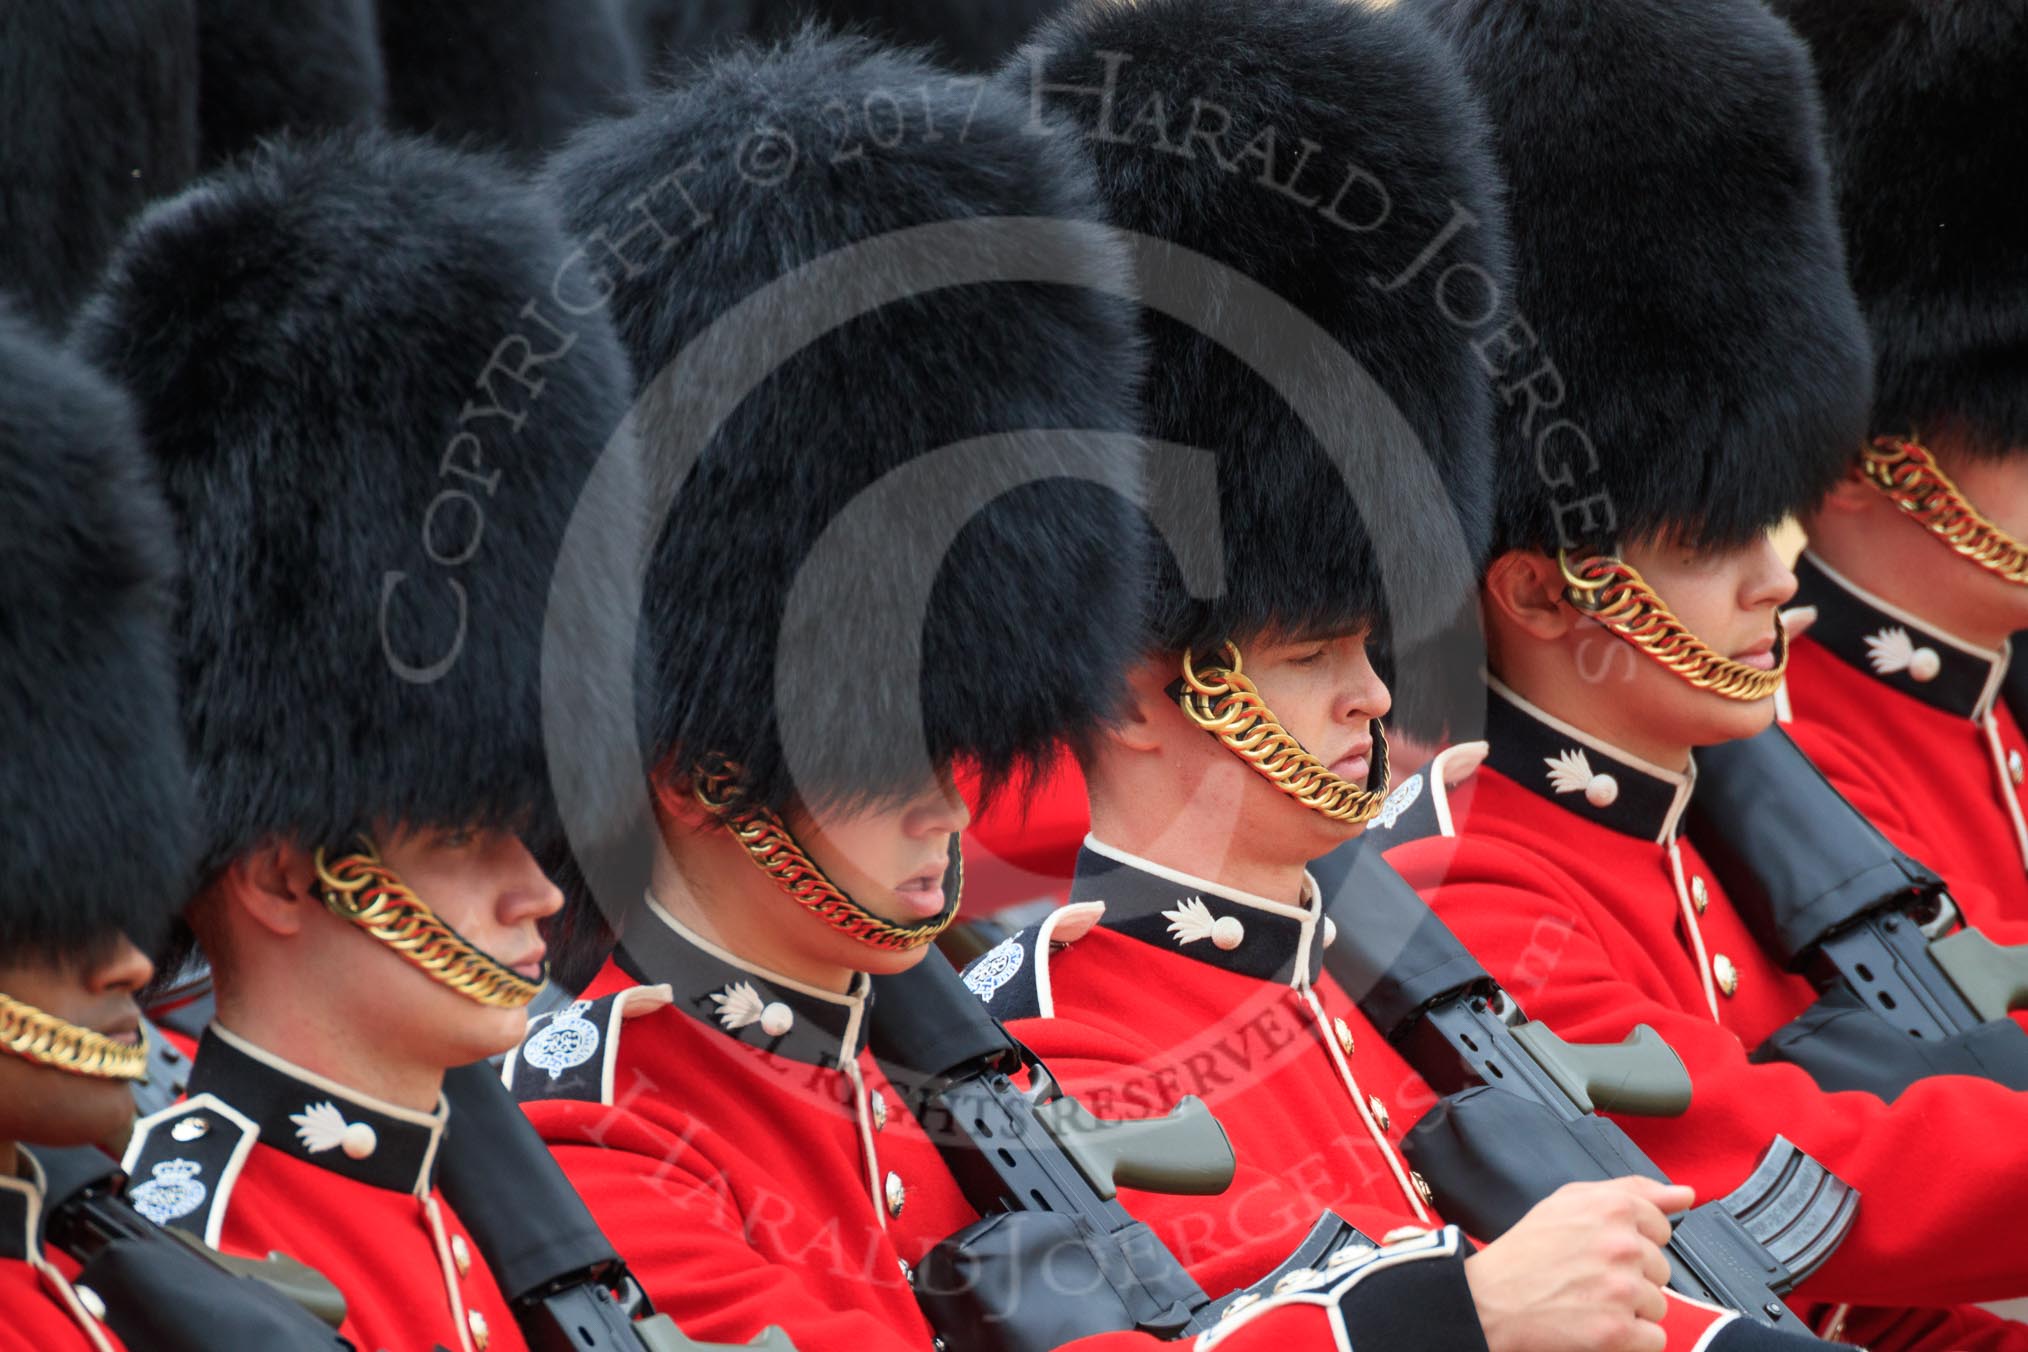 during The Colonel's Review {iptcyear4} (final rehearsal for Trooping the Colour, The Queen's Birthday Parade)  at Horse Guards Parade, Westminster, London, 2 June 2018, 11:48.